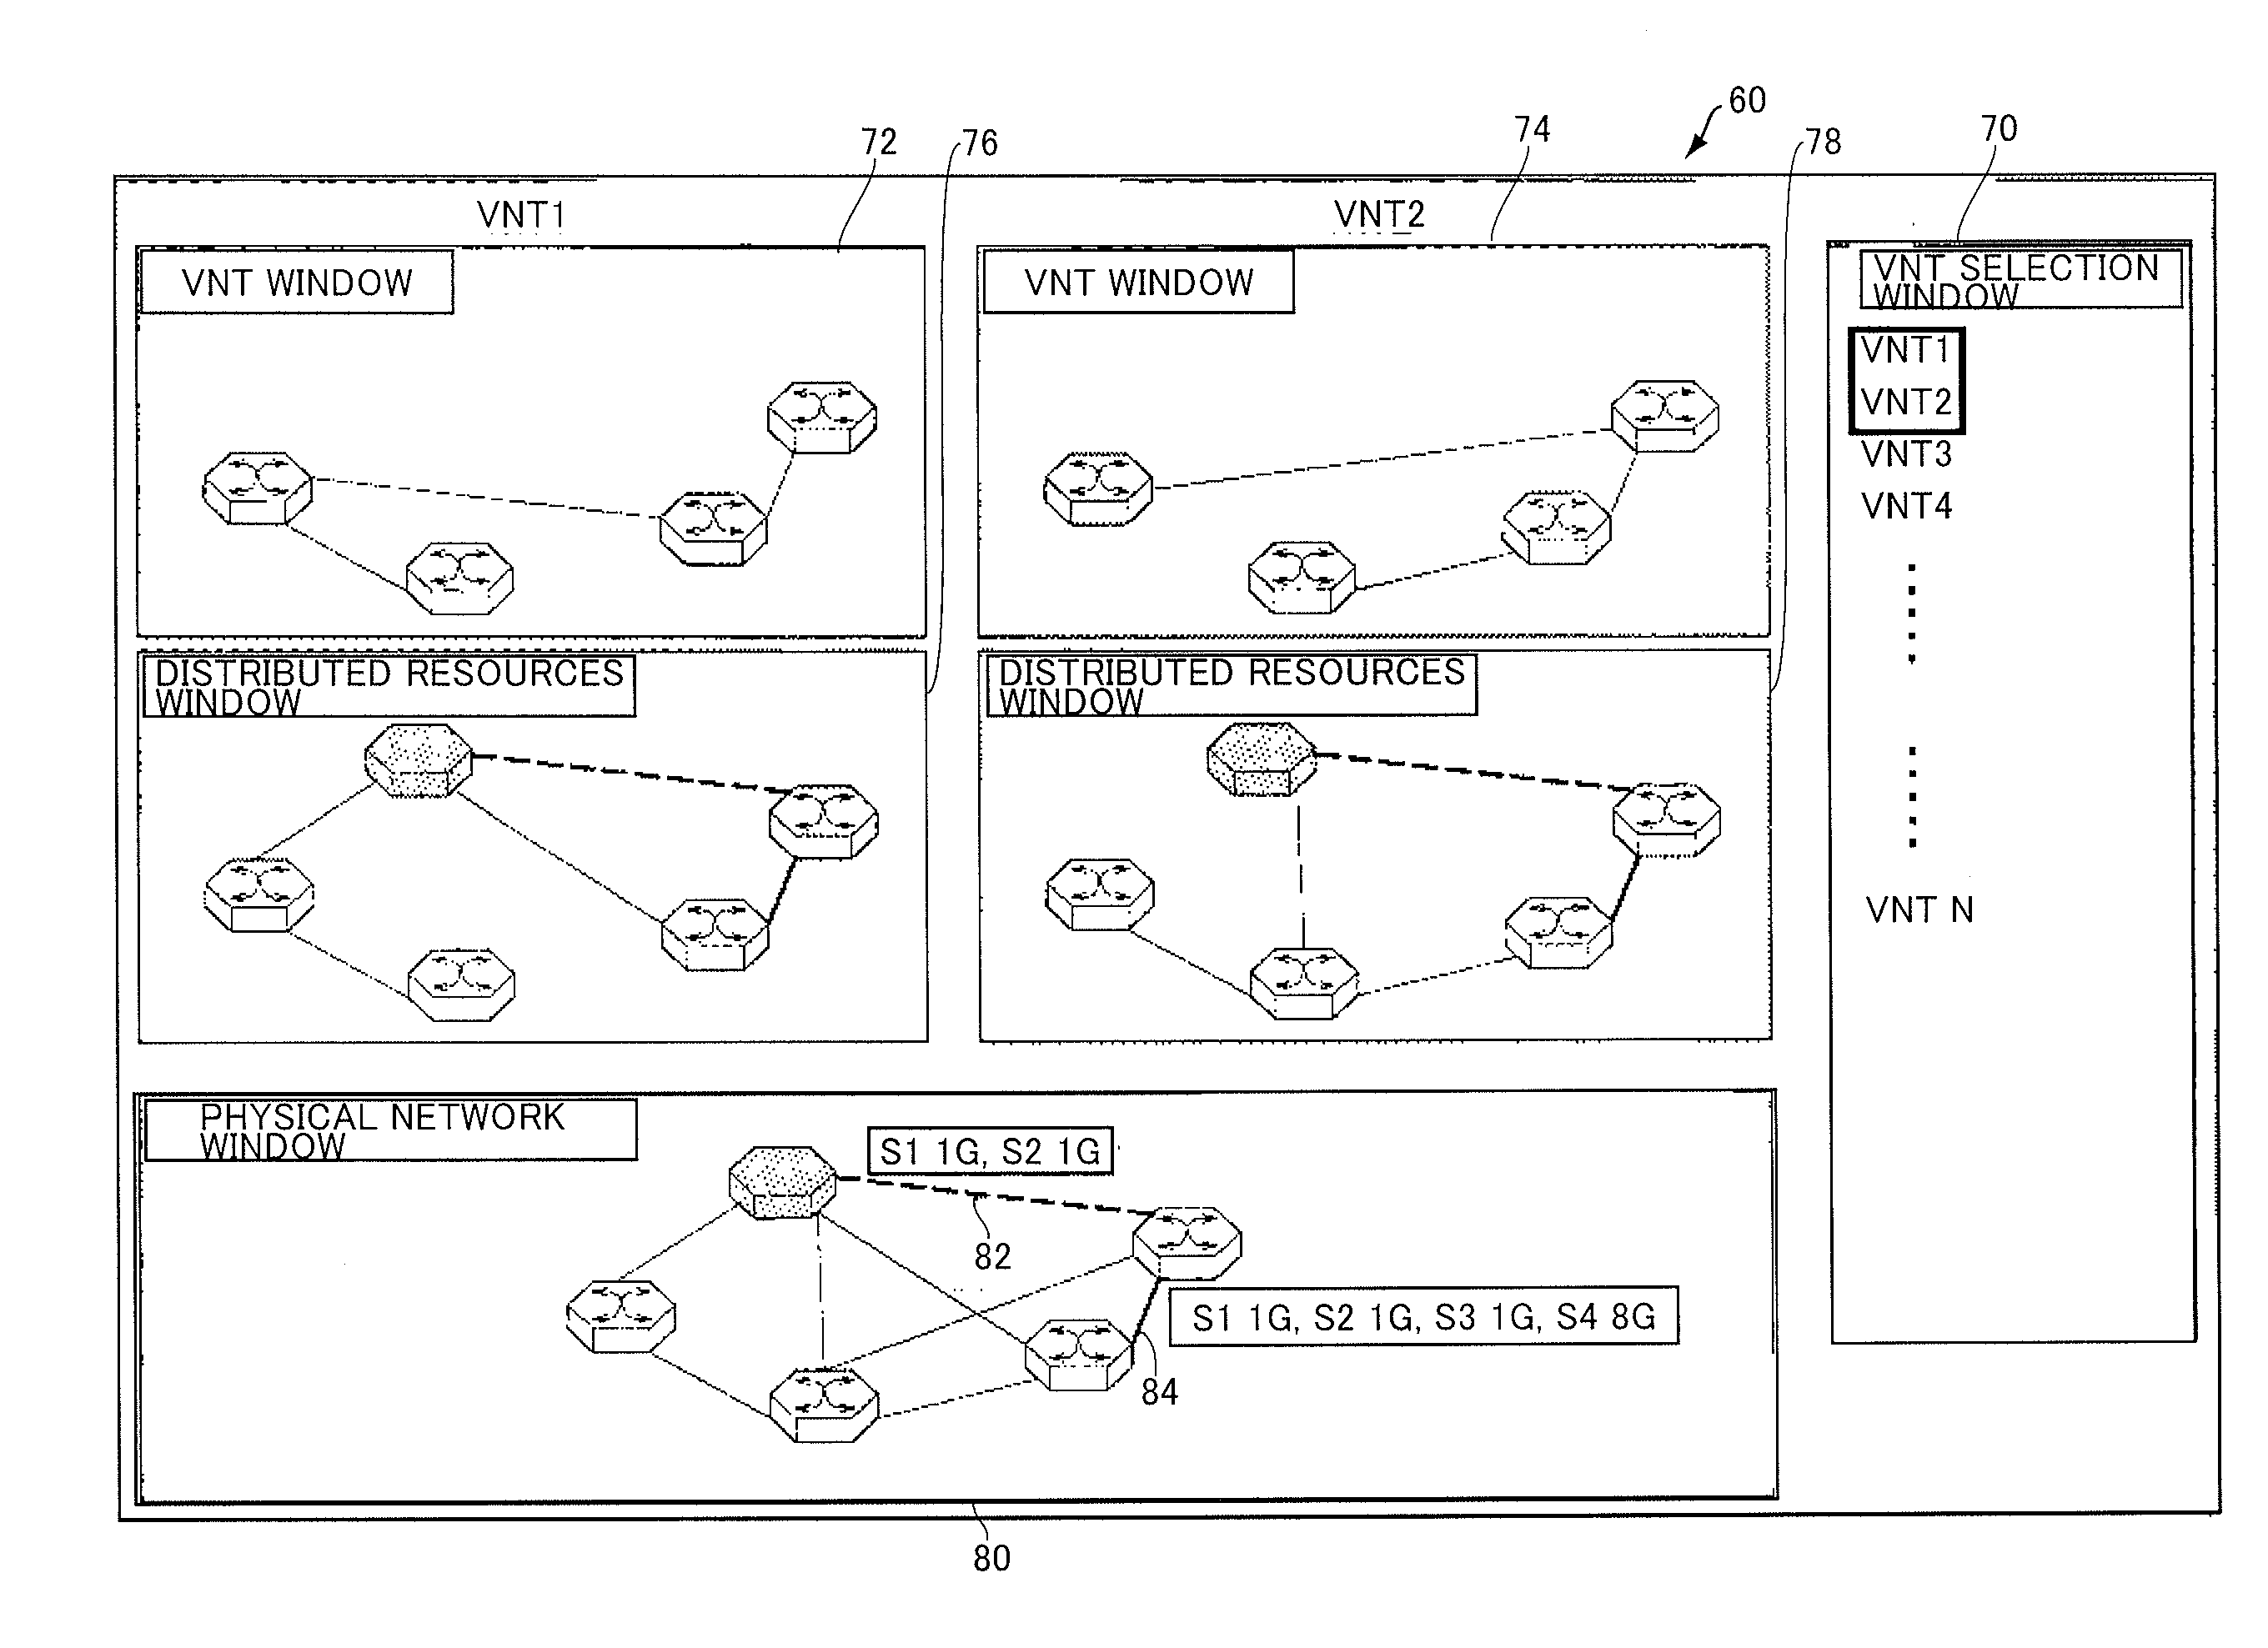 Network configuration and operation visualizing apparatus